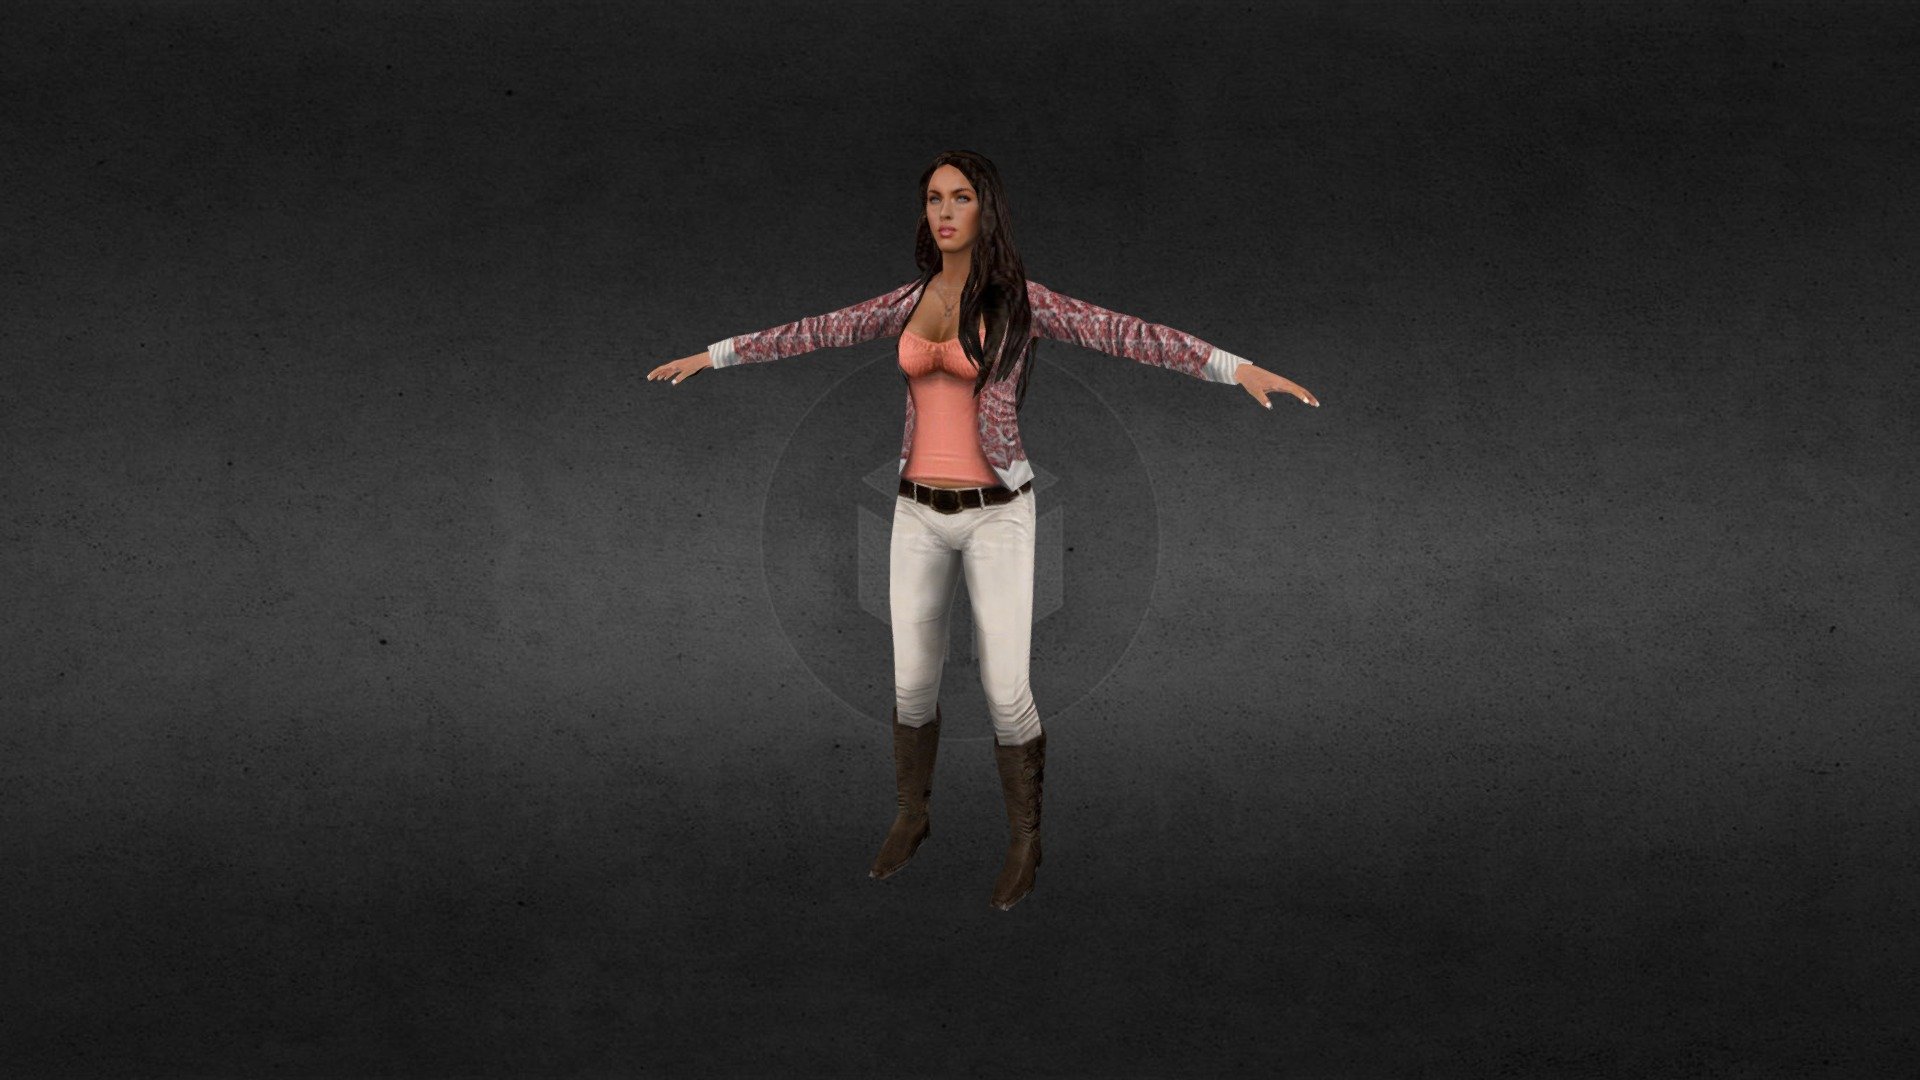 This is Mikaela Banes (Megan Fox) from Transformers: Revenge of the Fallen.
This model is not created by me.
This model can be used in games, renderings etc.
Use it wisely 3d model